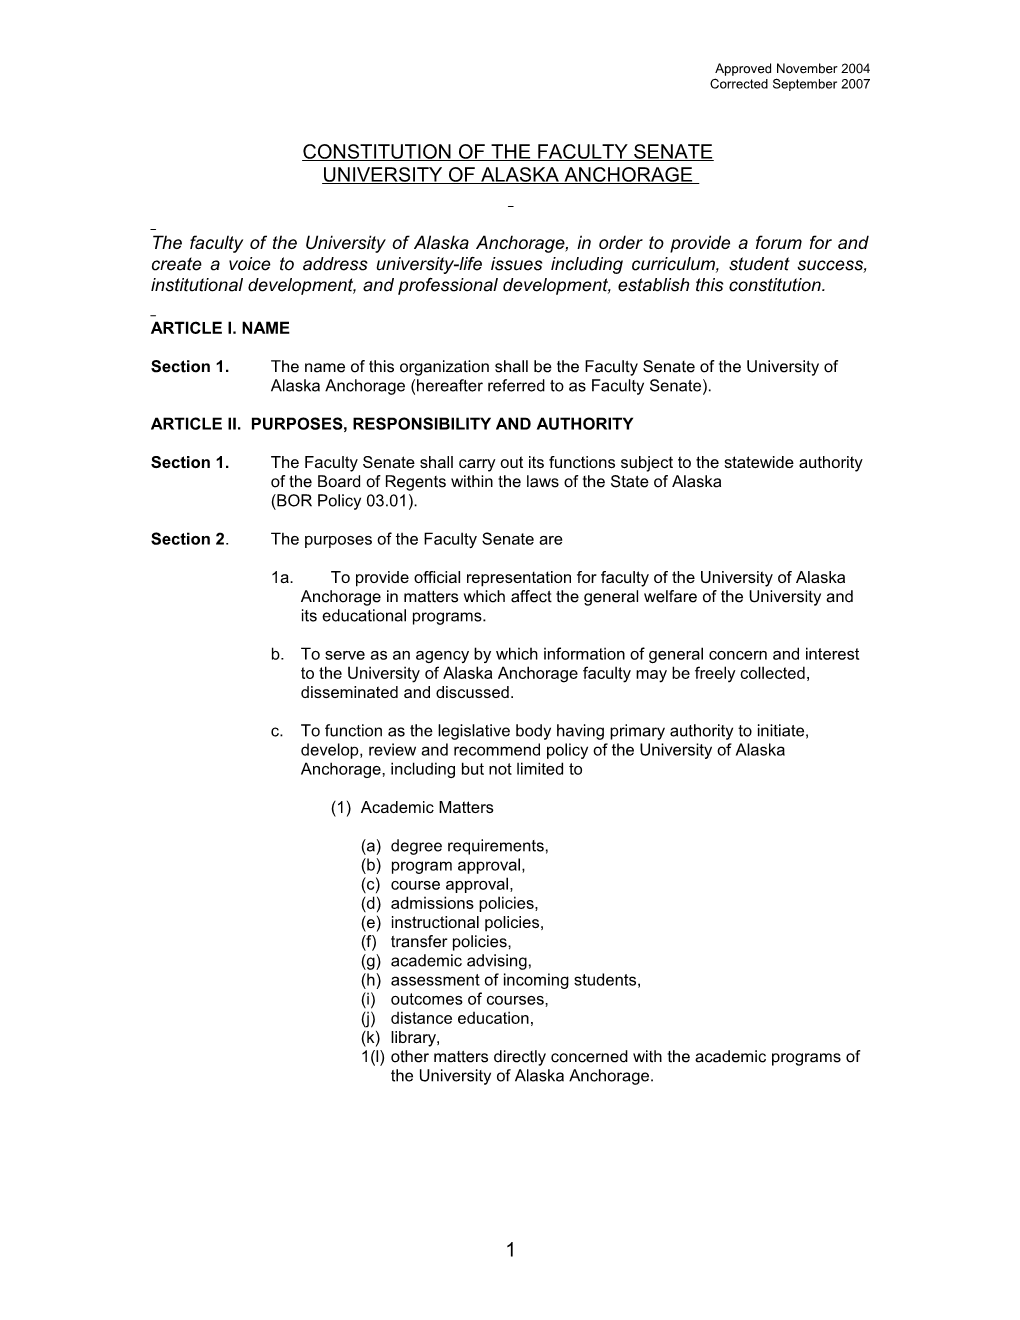 Constitution of the Faculty Senate